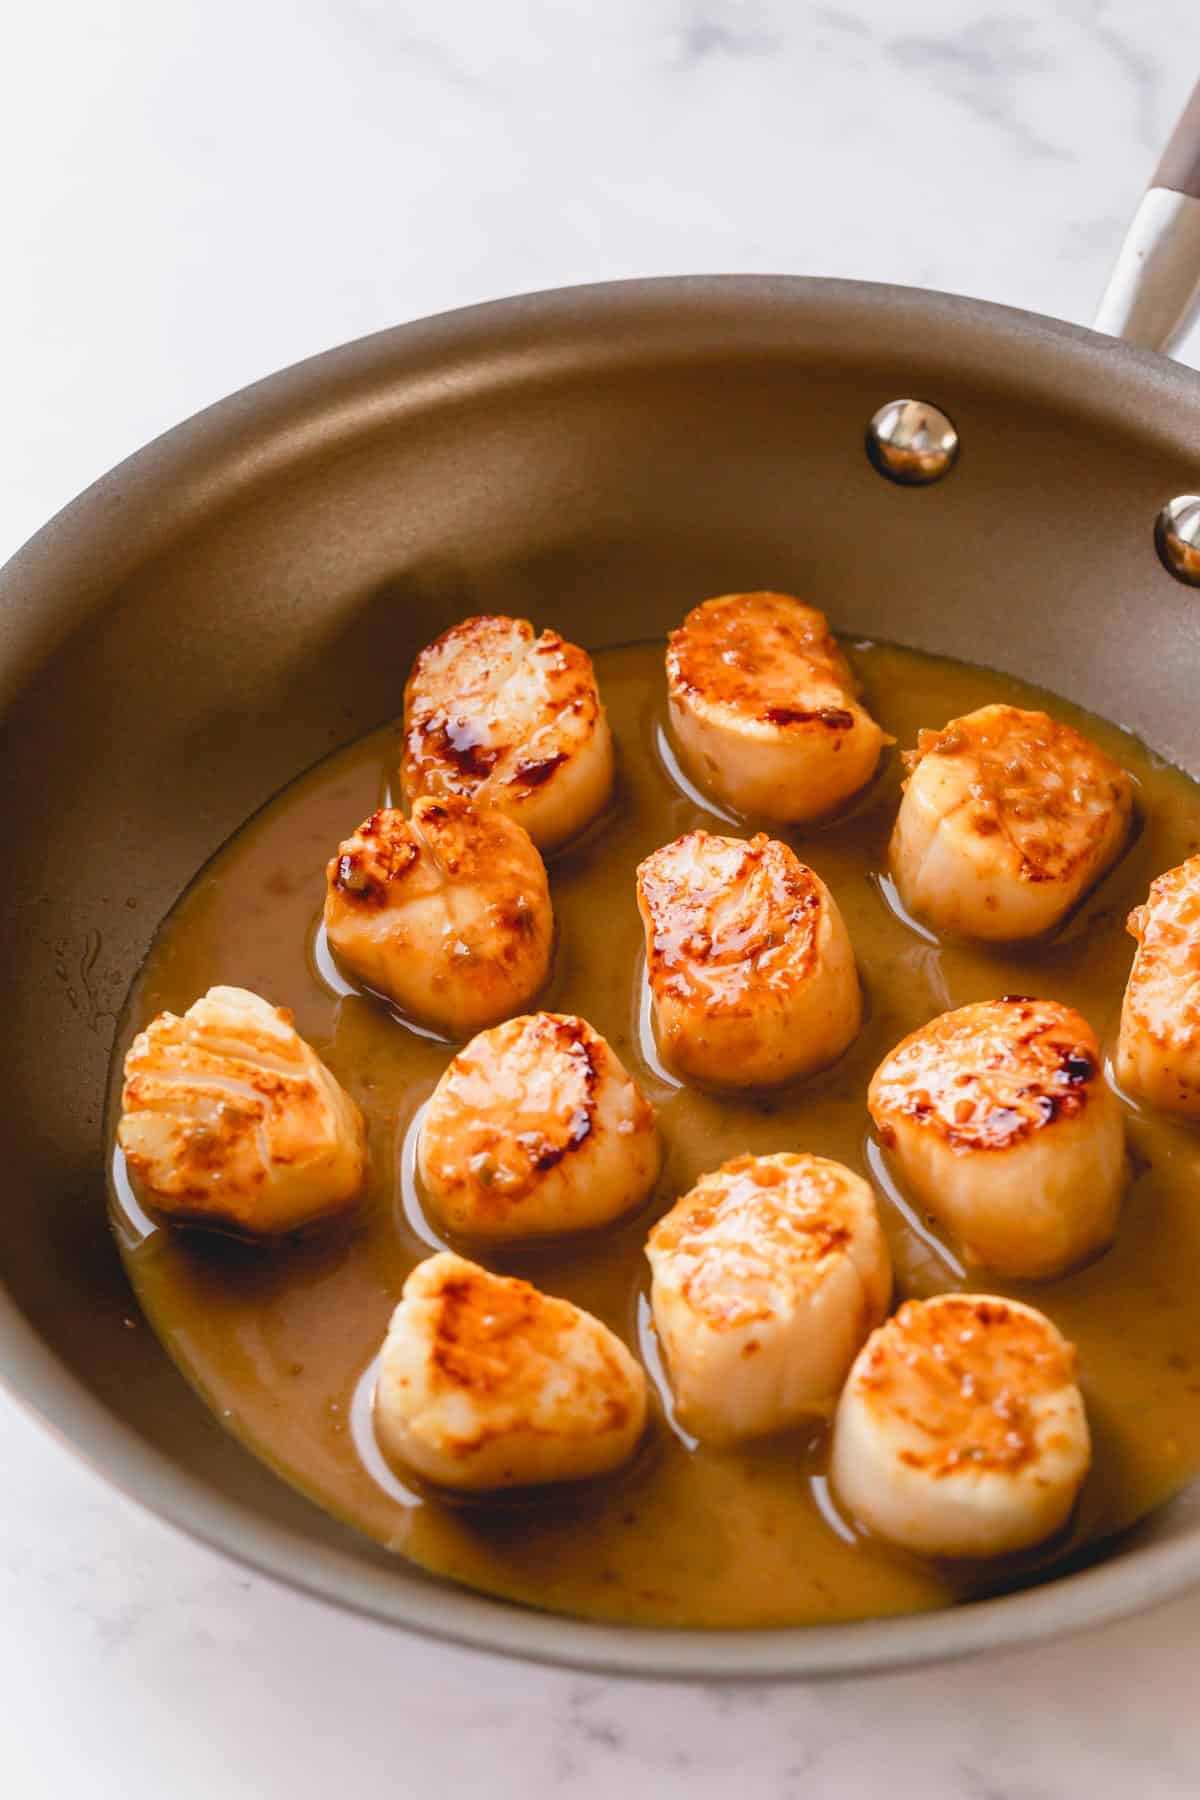 Seared scallops with tequila lime sauce in a skillet.